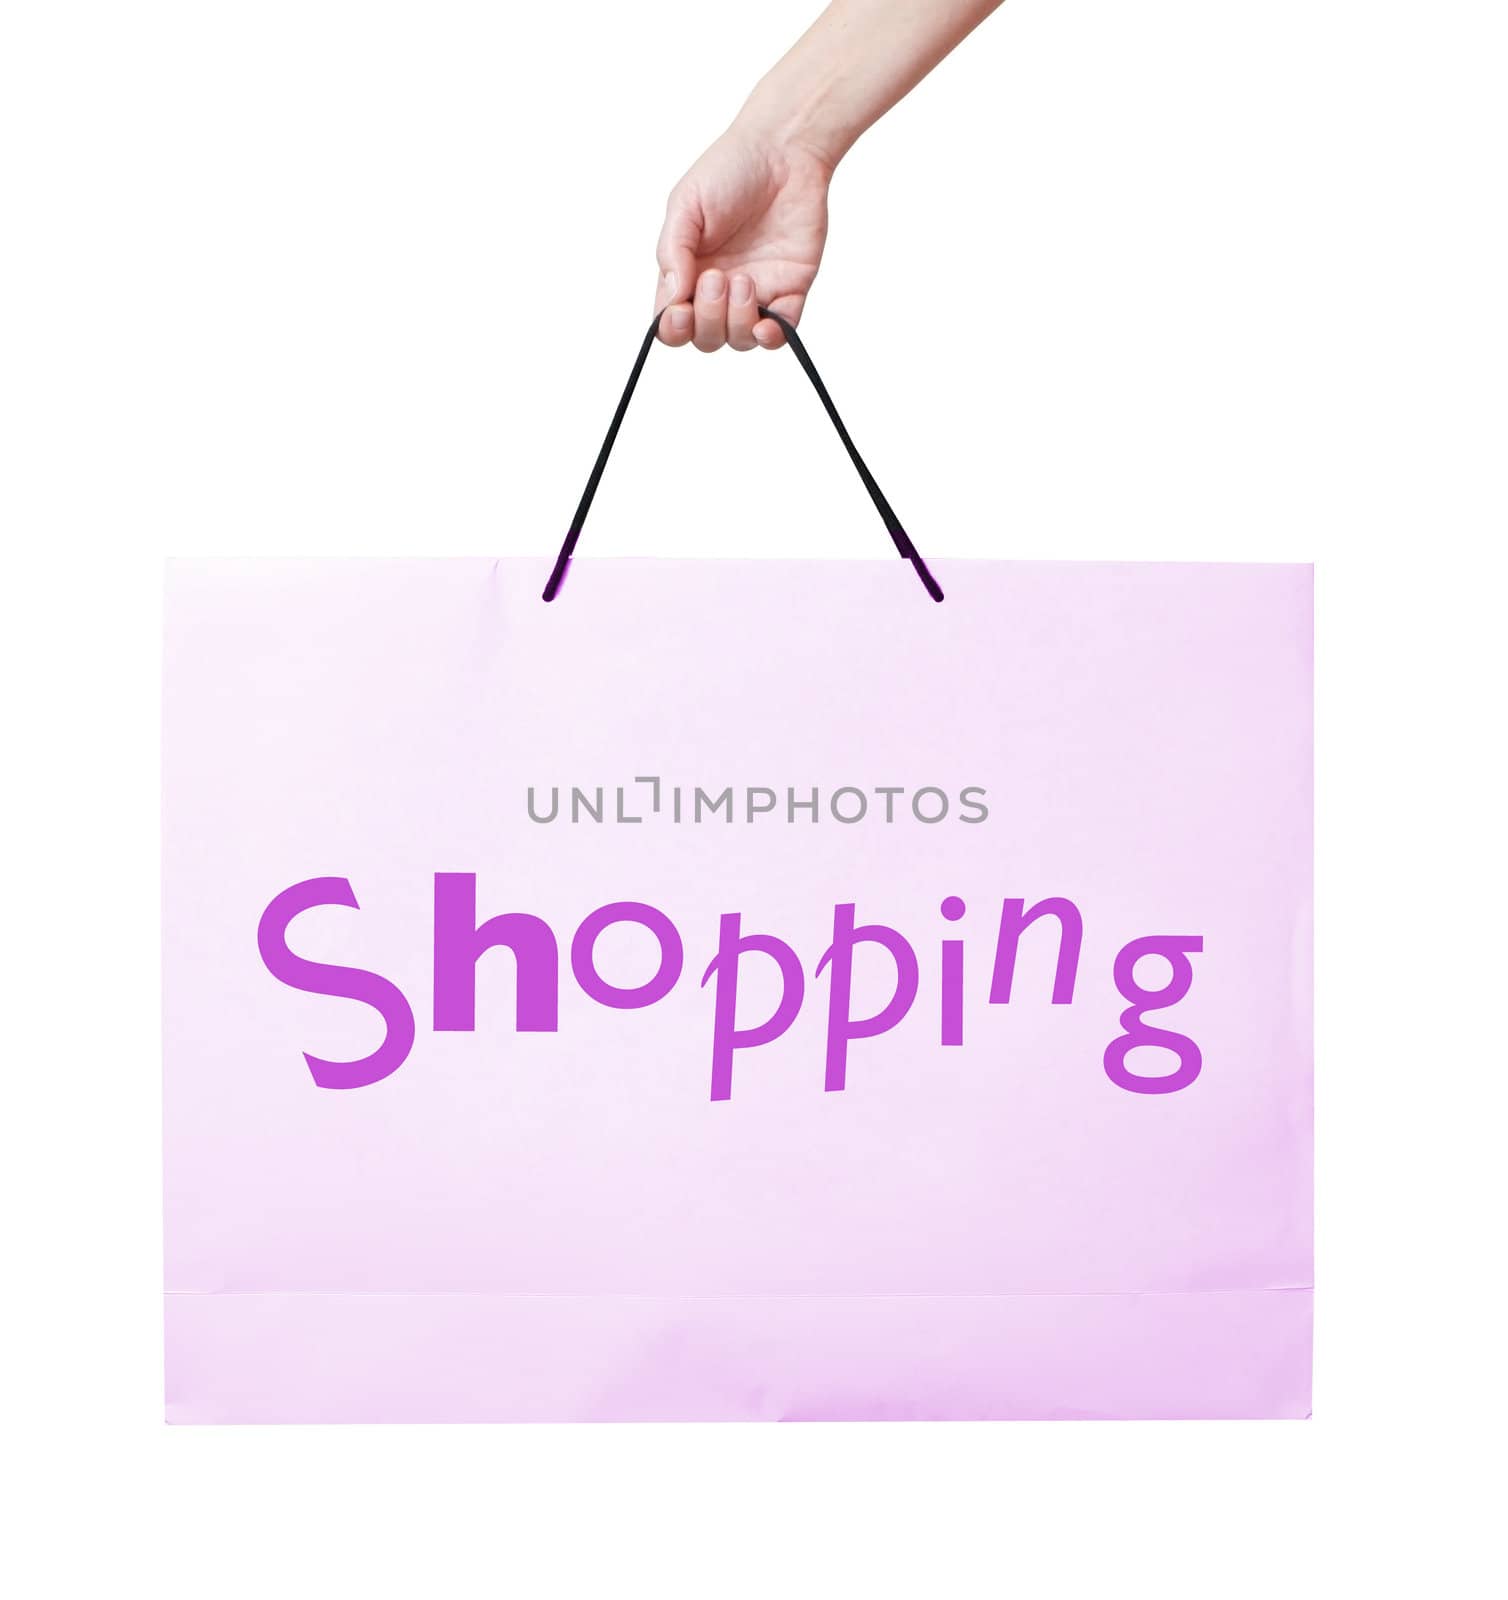 A shopping bag isolated on white